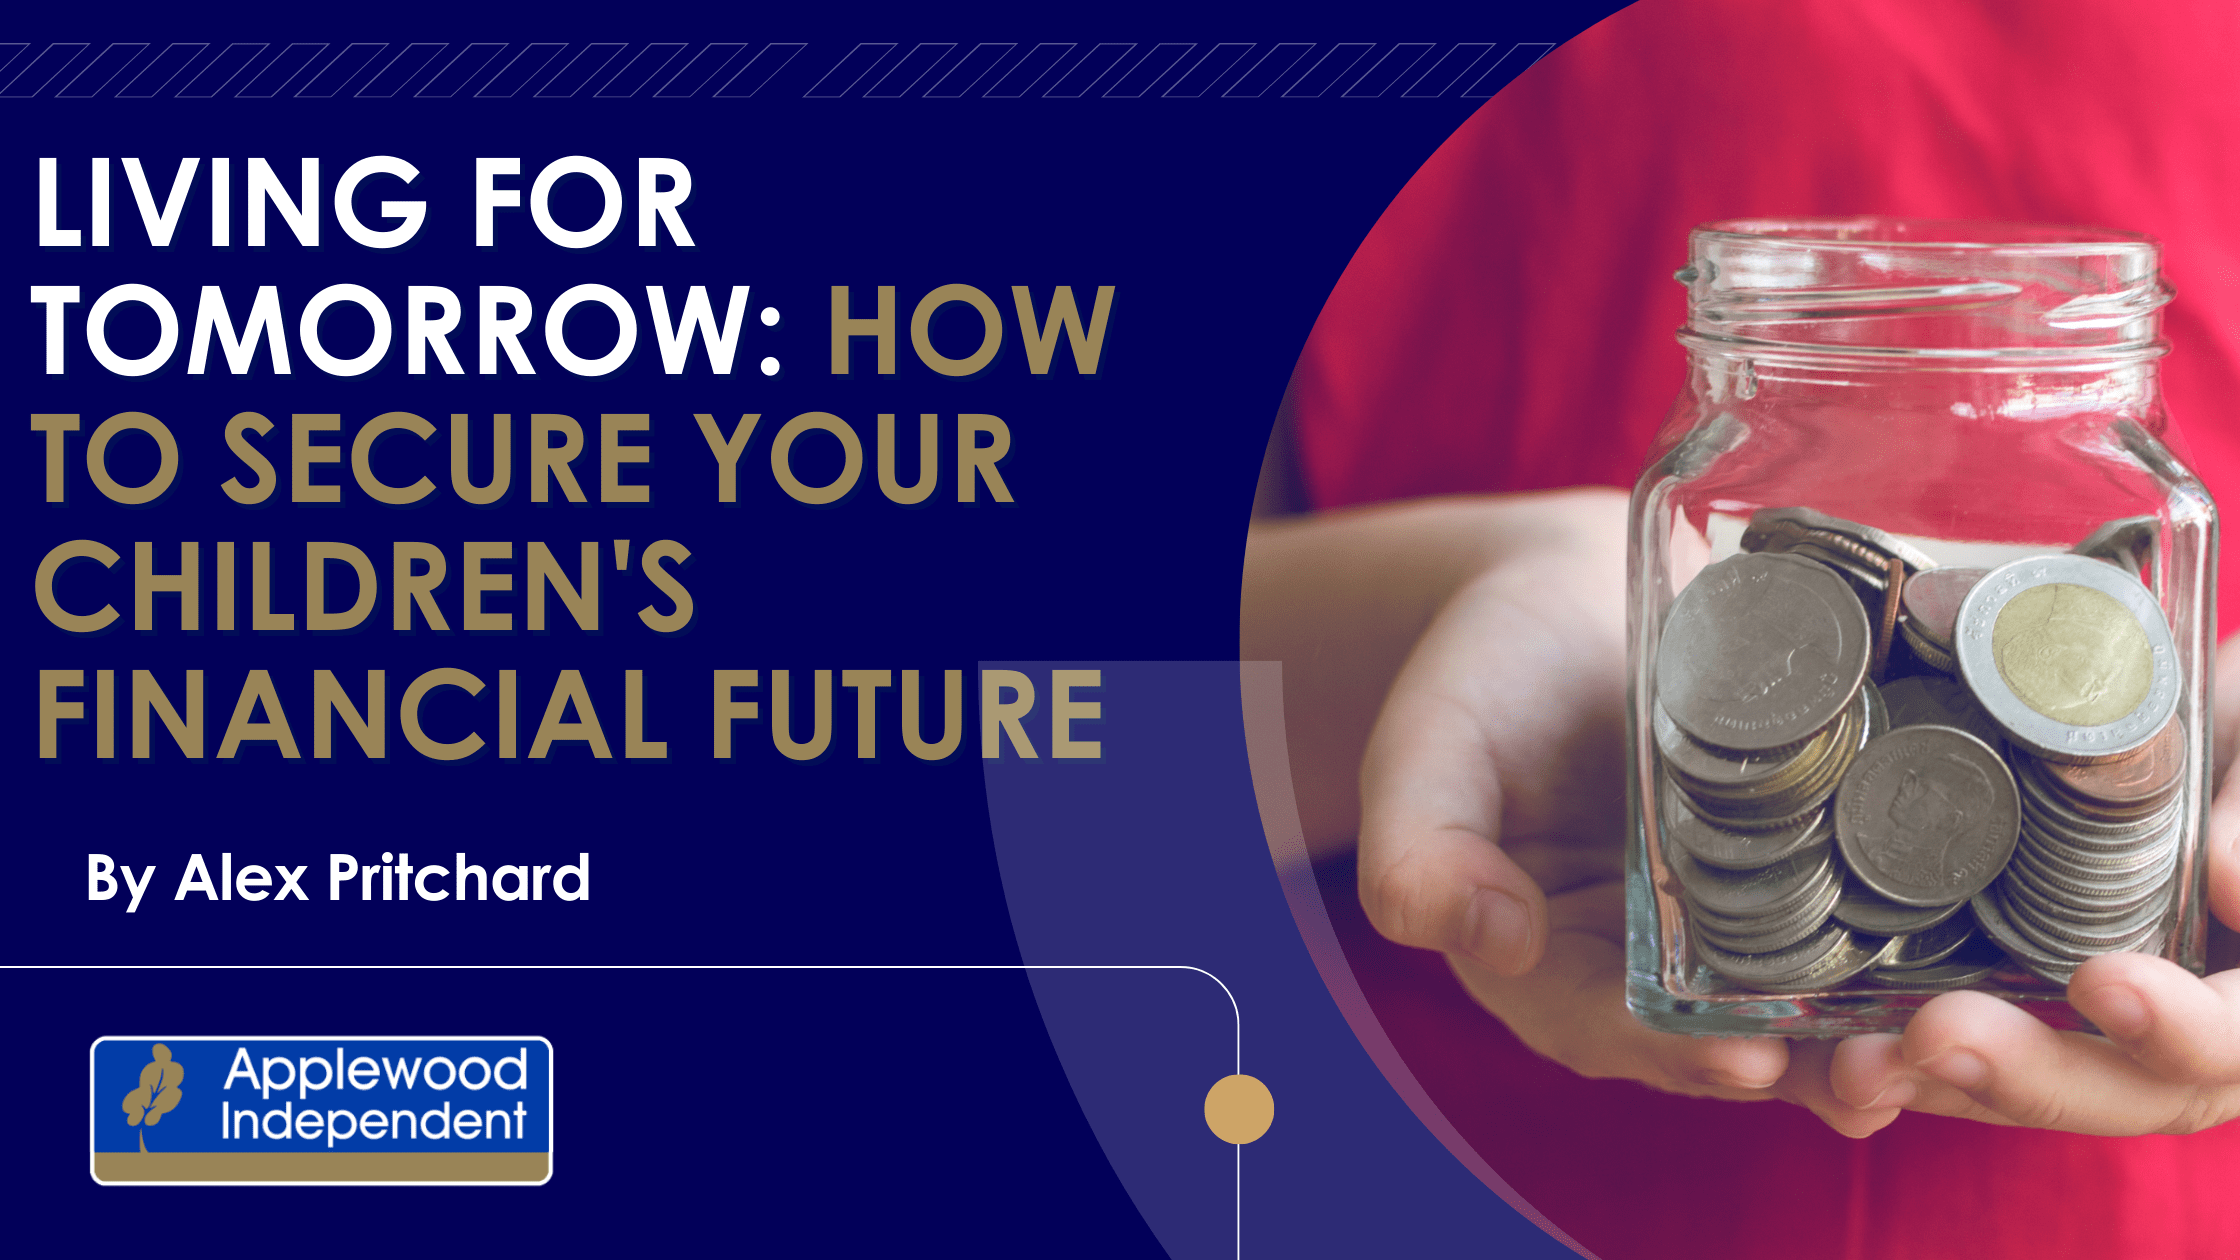 Image of a child holding a jar of coins with the text "Living For Tomorrow: How To Secure Your Children’s Financial Future"